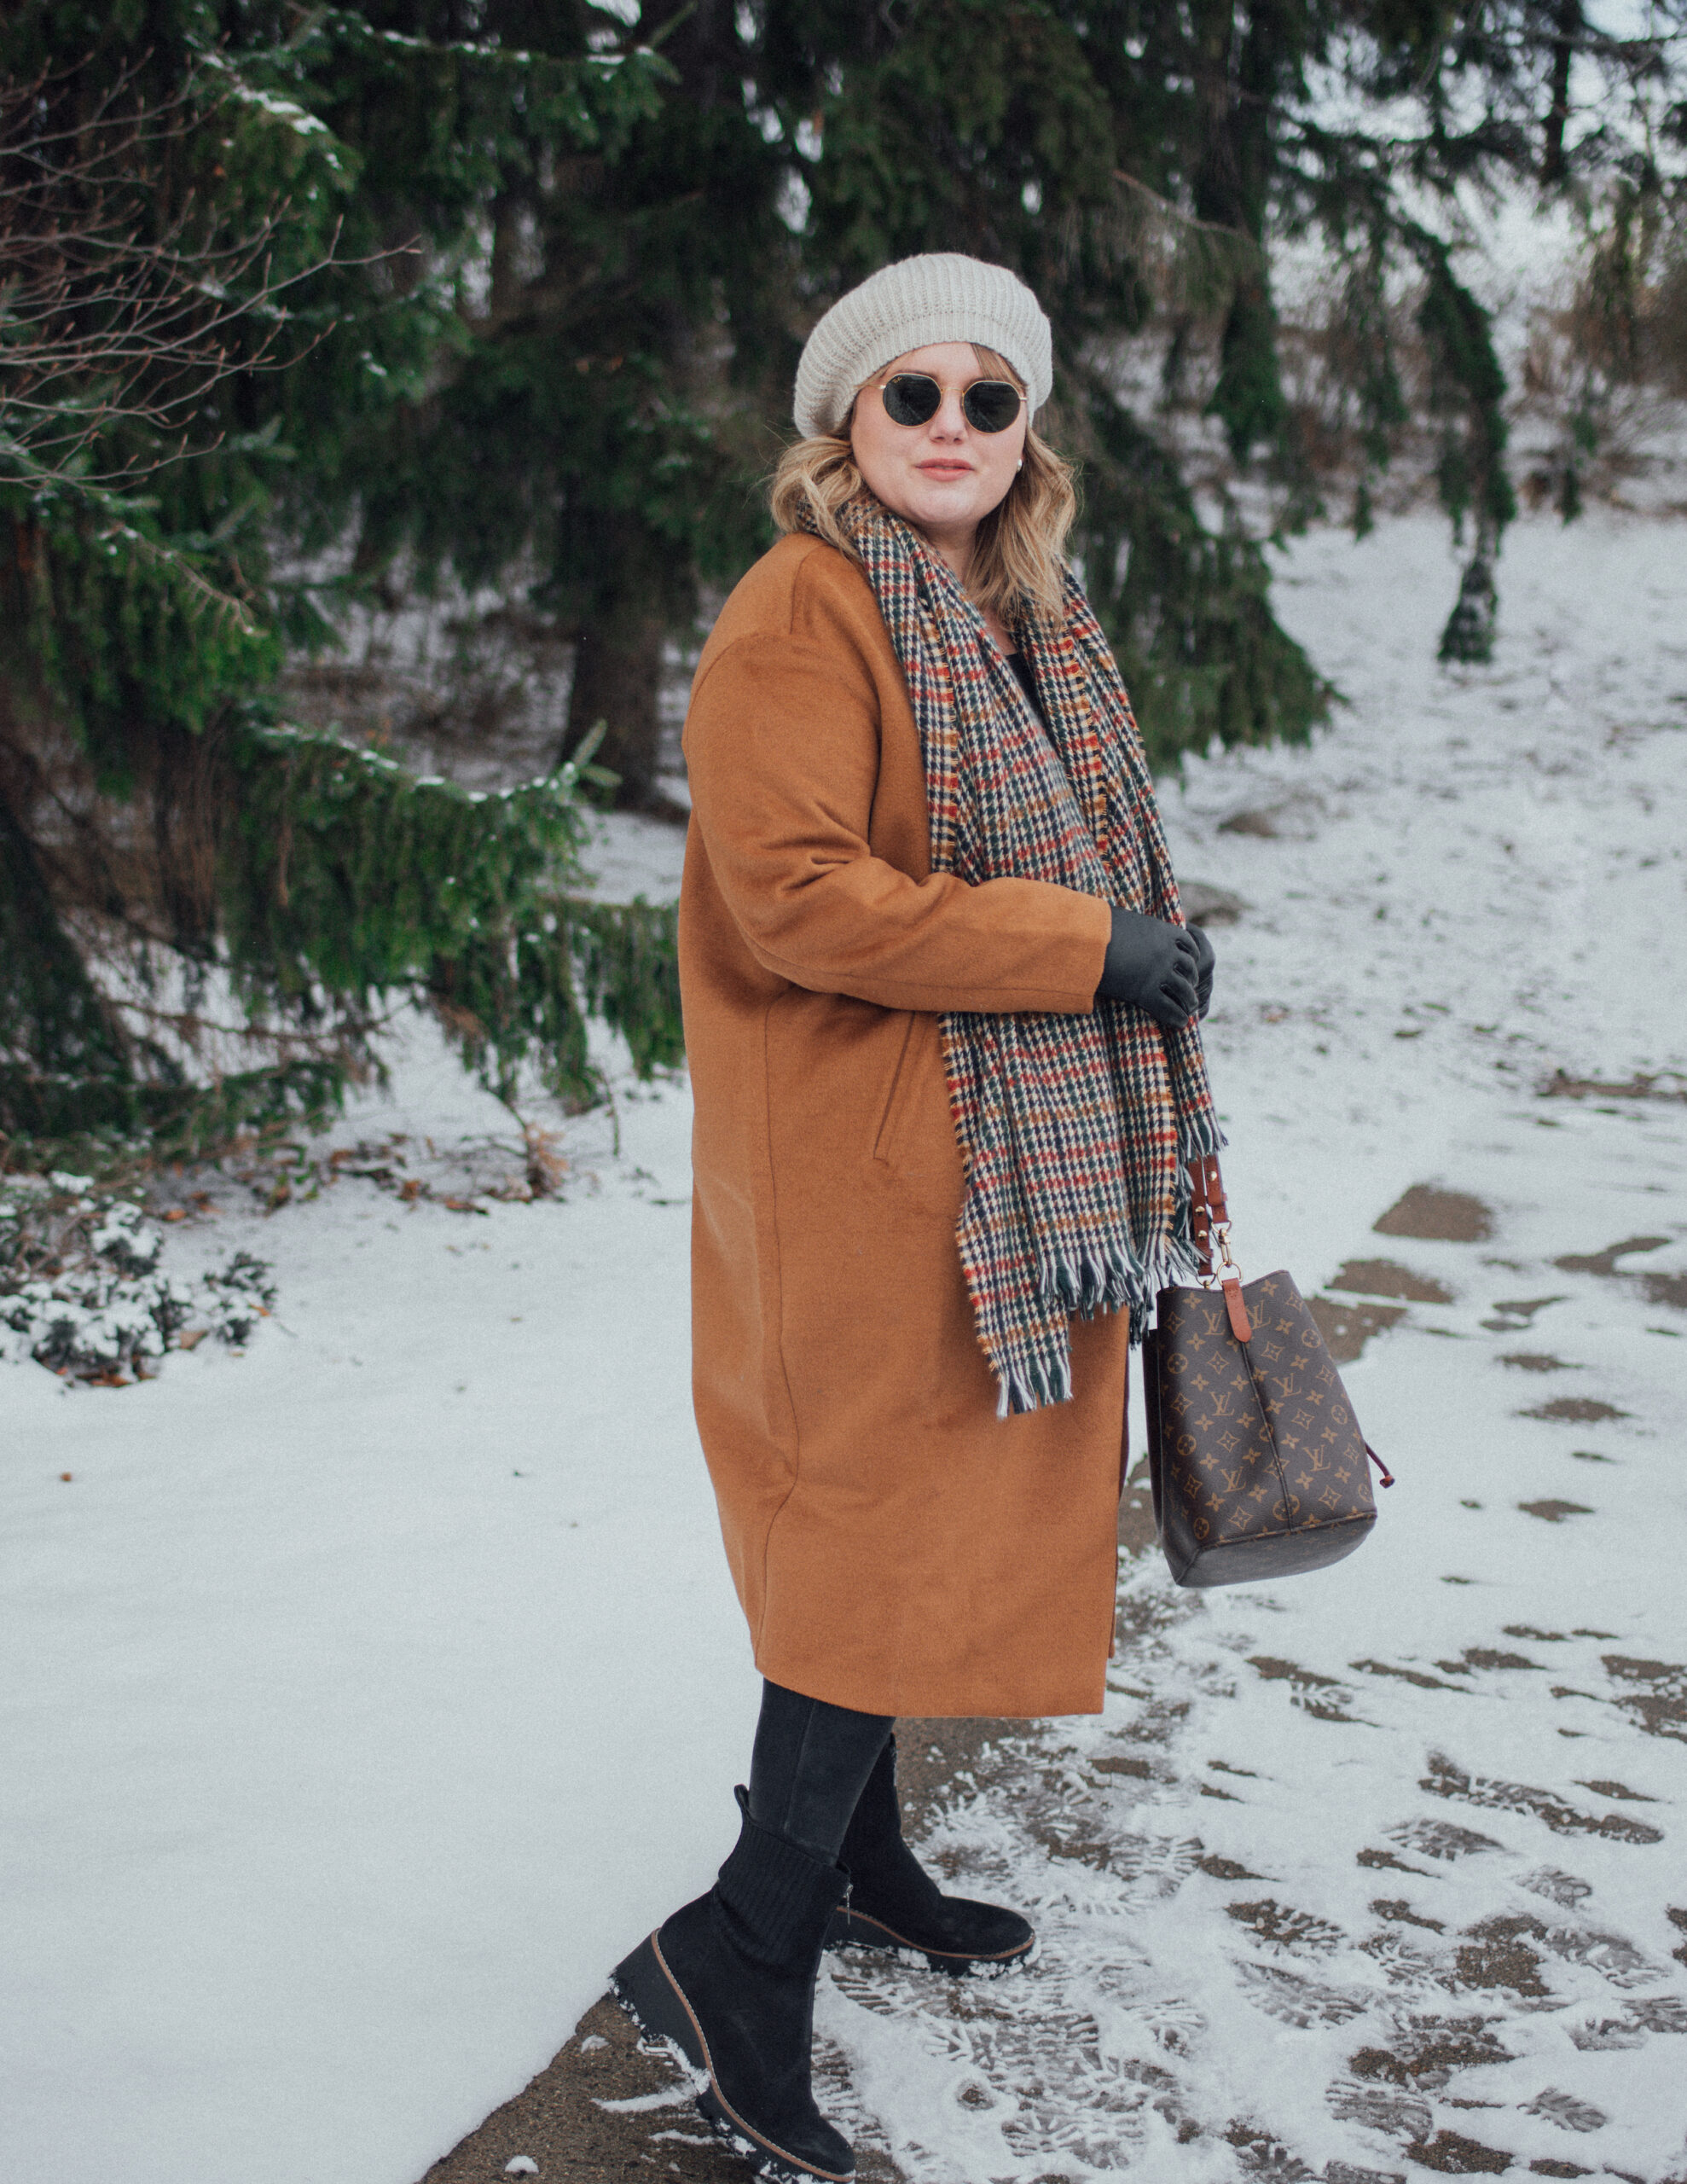 Sharing some winter outfit essentials, perfect for staying warm and looking cute this winter. Shop this outfit through my blog or LTK.